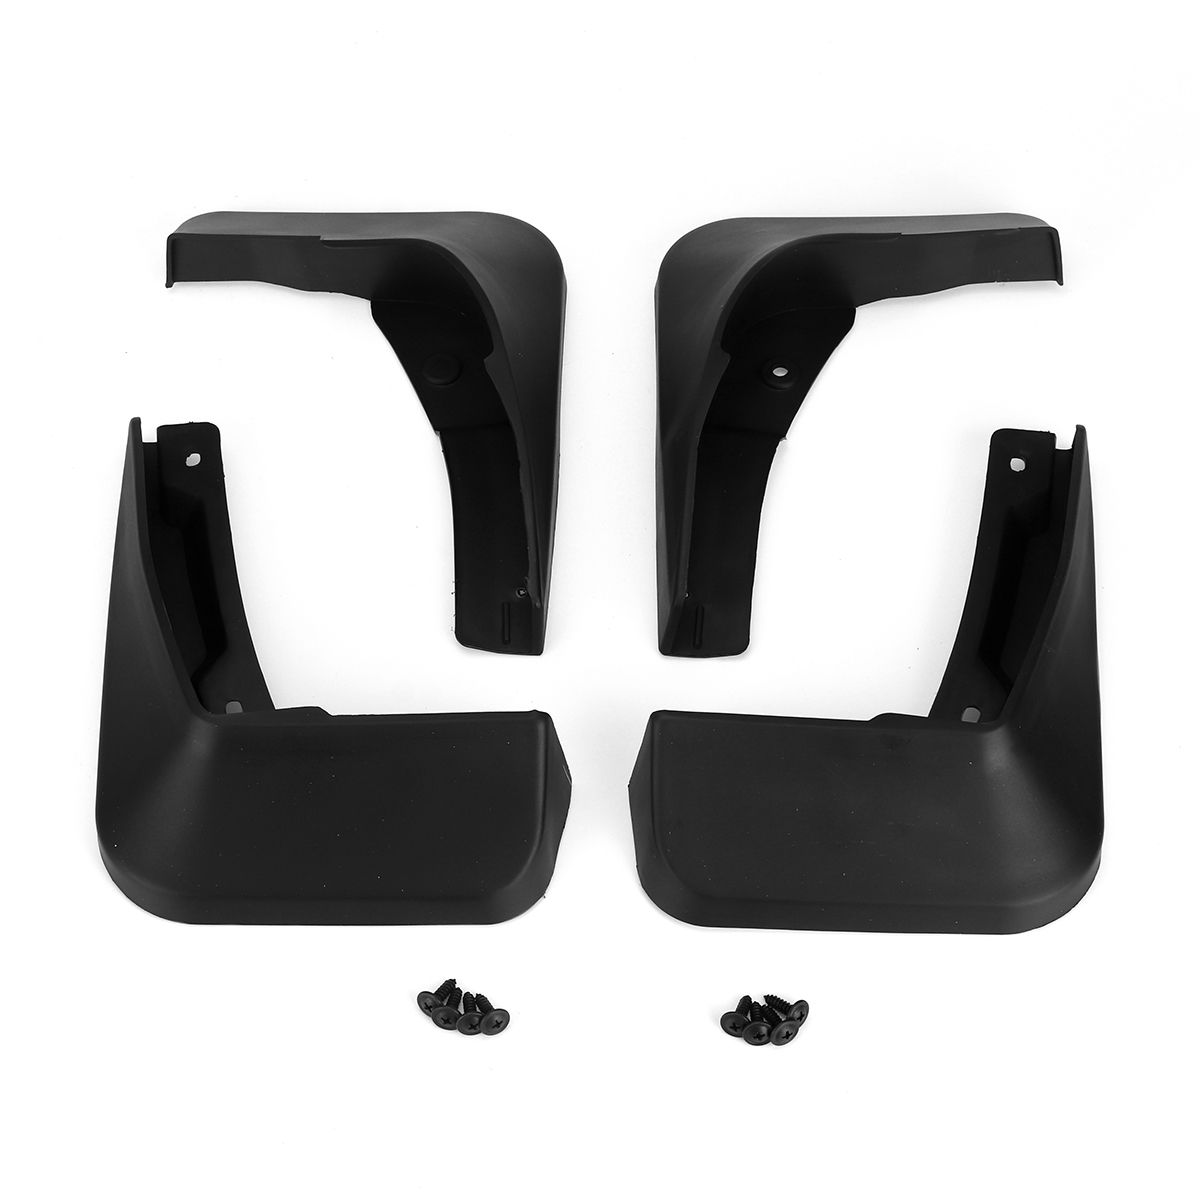 Front-And-Rear-Mud-Flaps-Car-Mudguards-For-Chevrolet-Malibu-2016-2017-2018-1406568